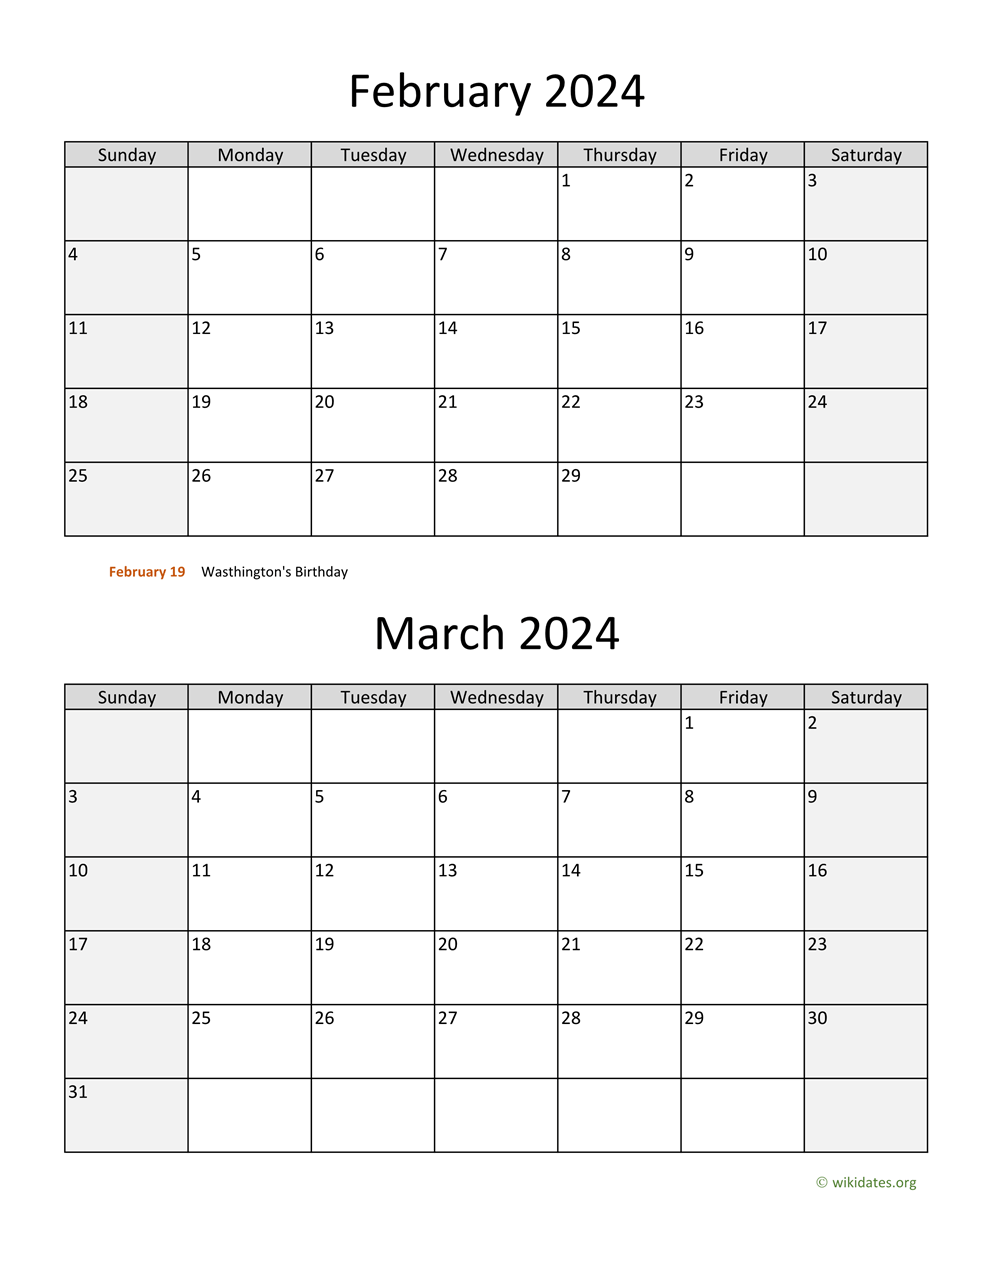 February And March 2024 Calendar WikiDates